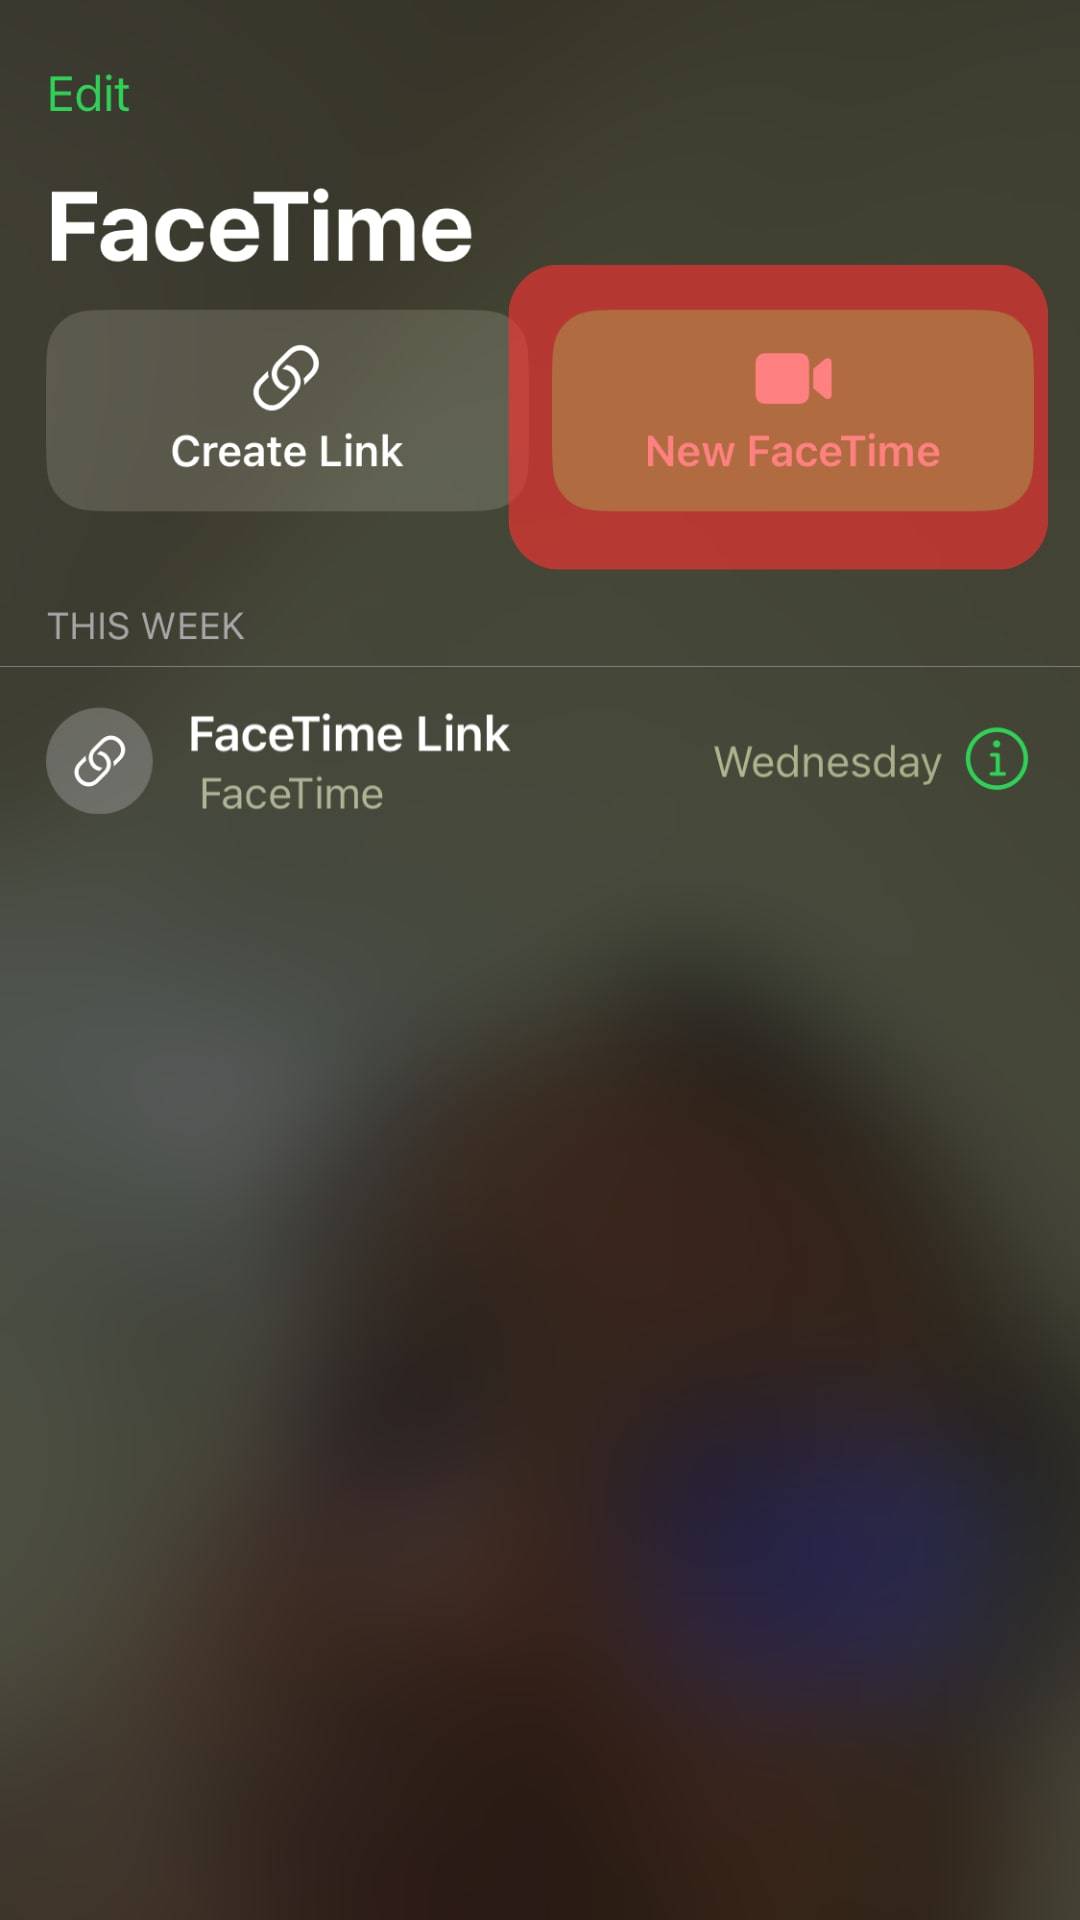 Open Your Facetime App And Initiate Your Call.